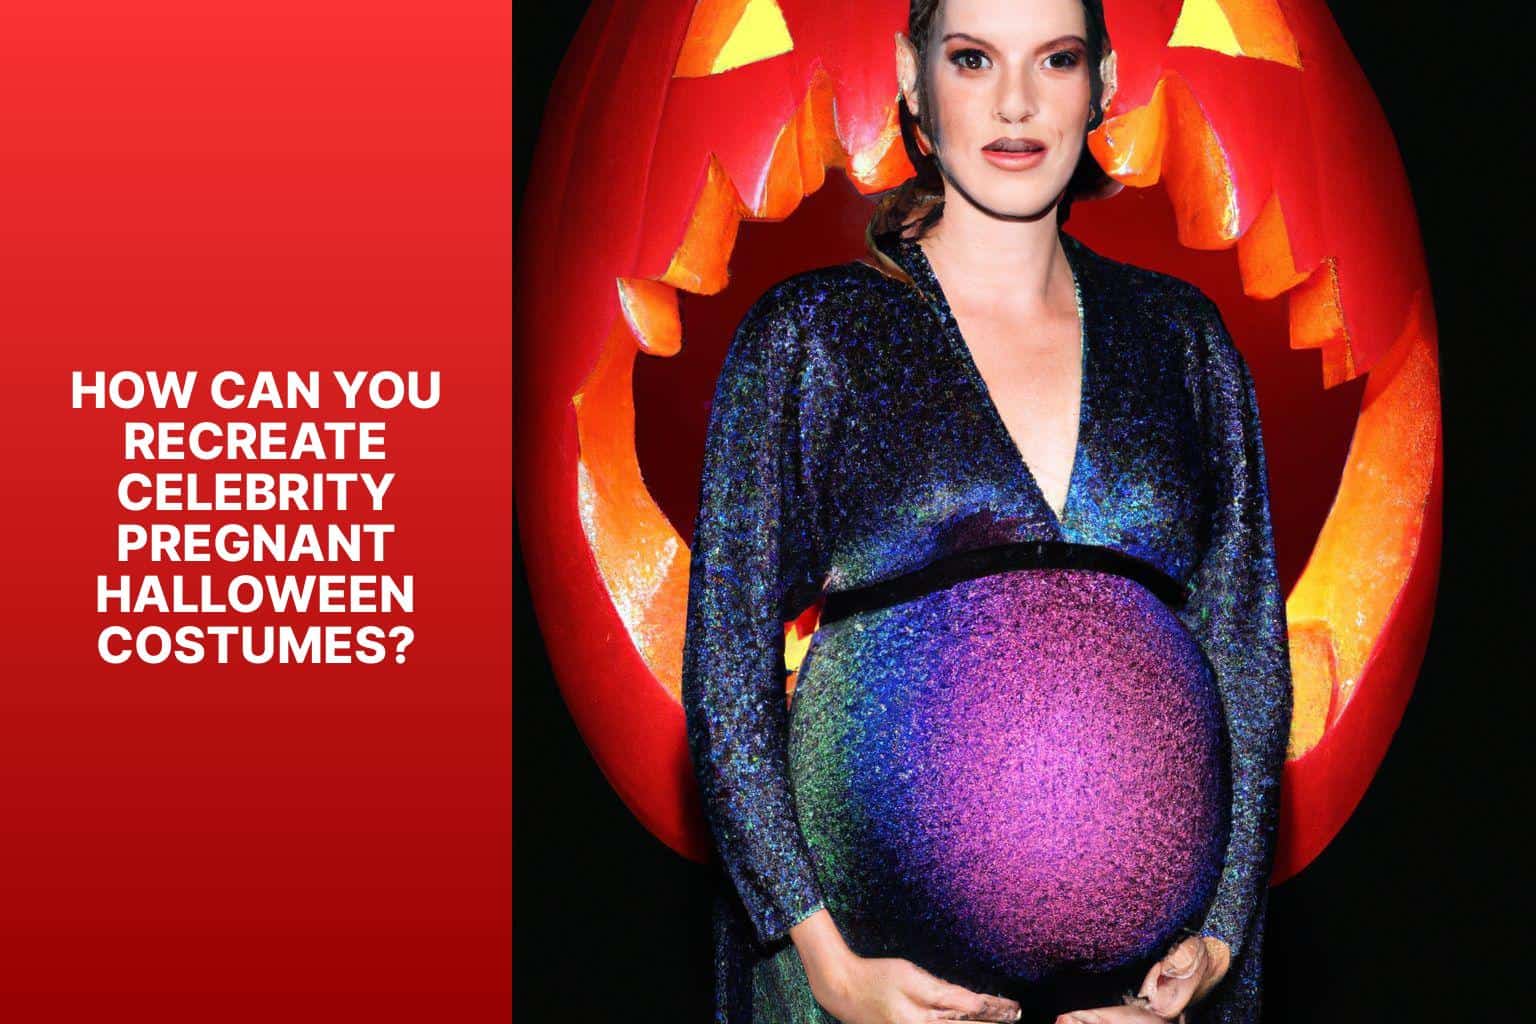 How Can You Recreate Celebrity Pregnant Halloween Costumes? - celebrity pregnant halloween costumes 